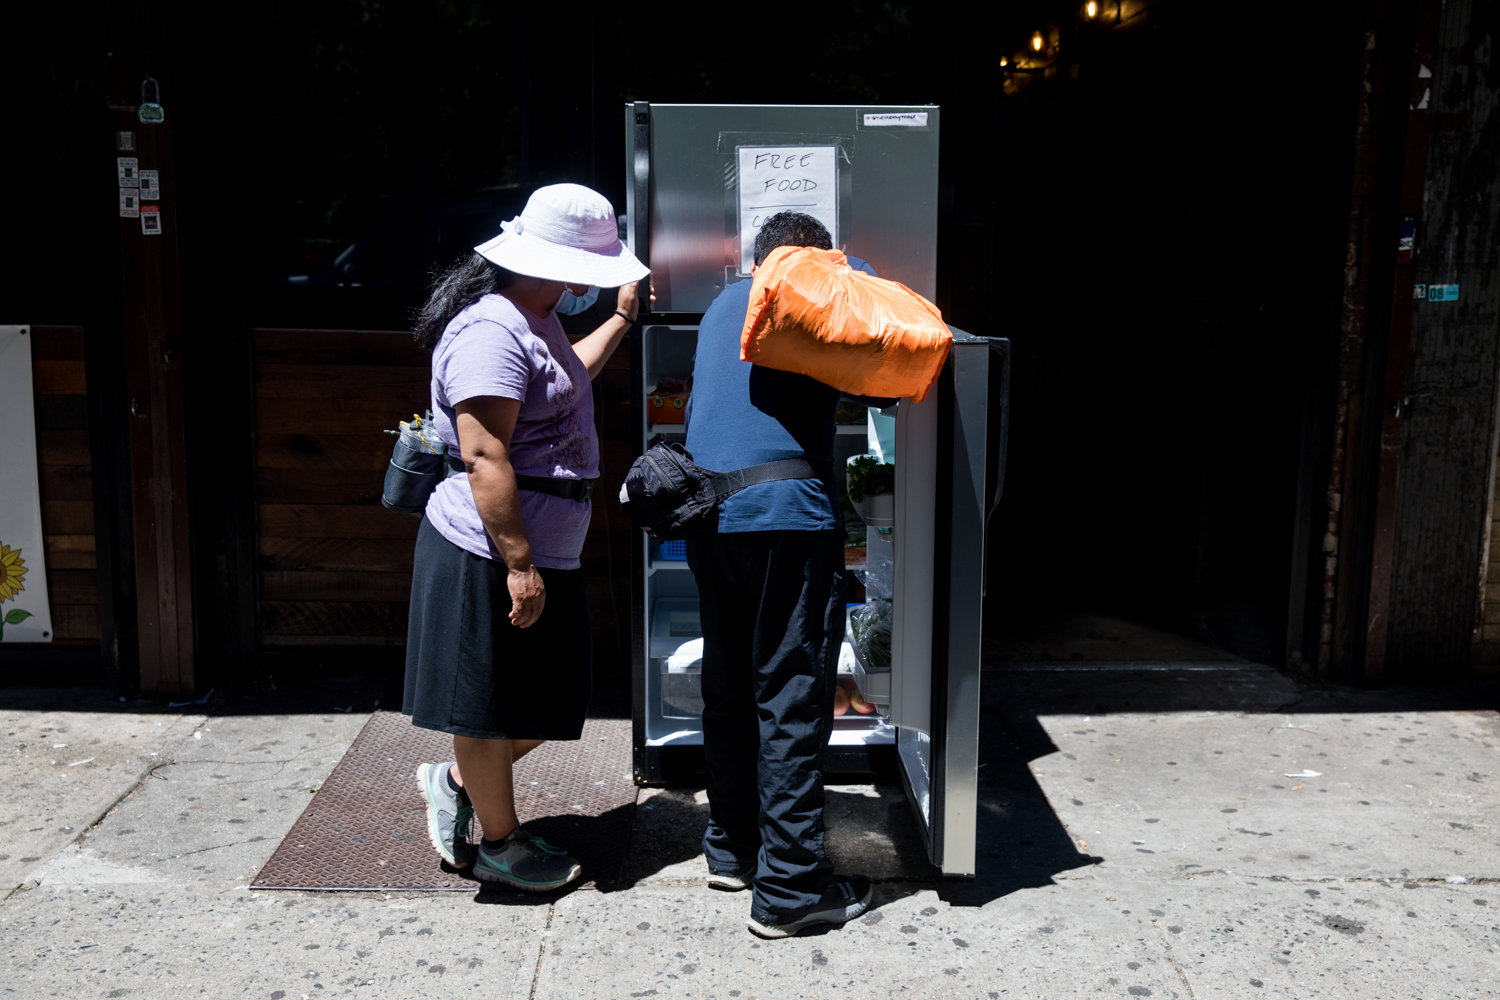 Passersby check a refrigerator outside The Last Stop on Broadway to see what food is available. The fridge there is part of a network across the city stocked by volunteers. Food is available for free to anyone who needs it.